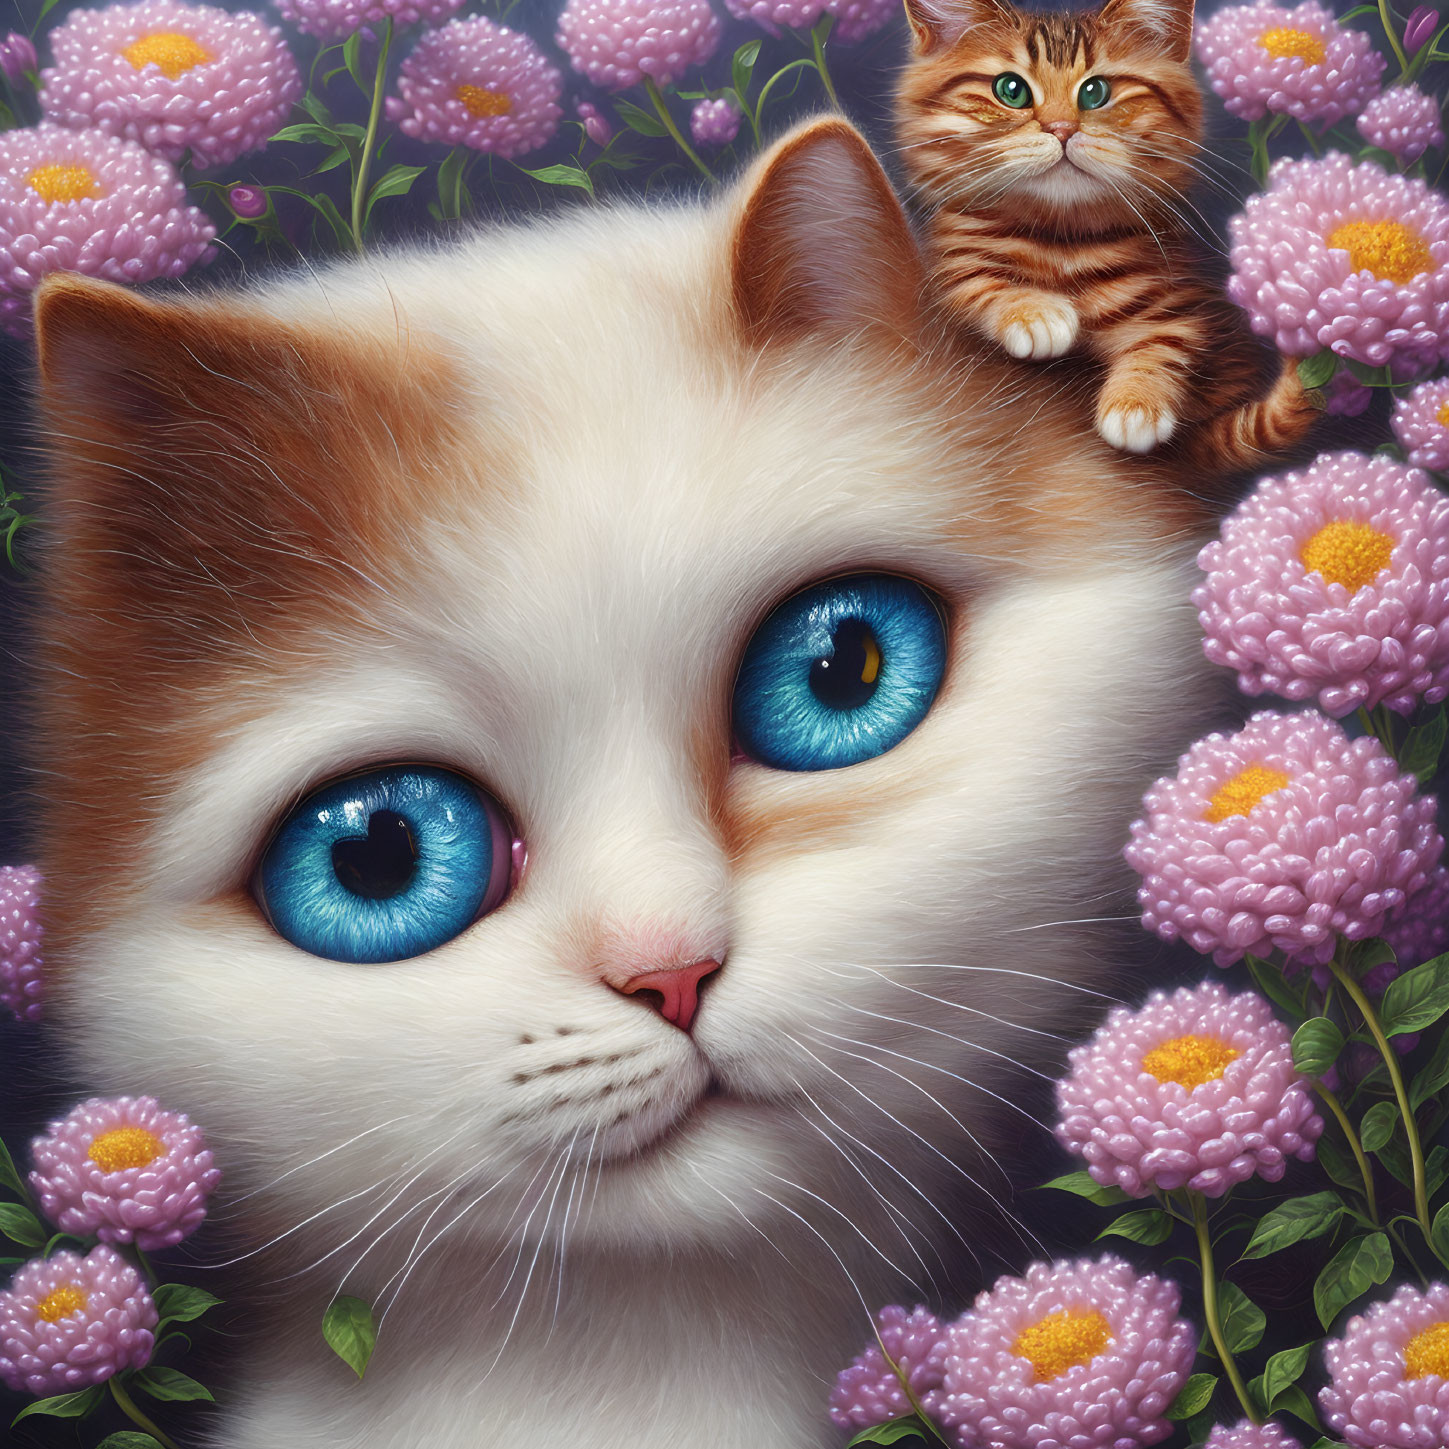 Detailed Illustration of Big-Eyed Cat and Tabby Kitten Among Pink Flowers